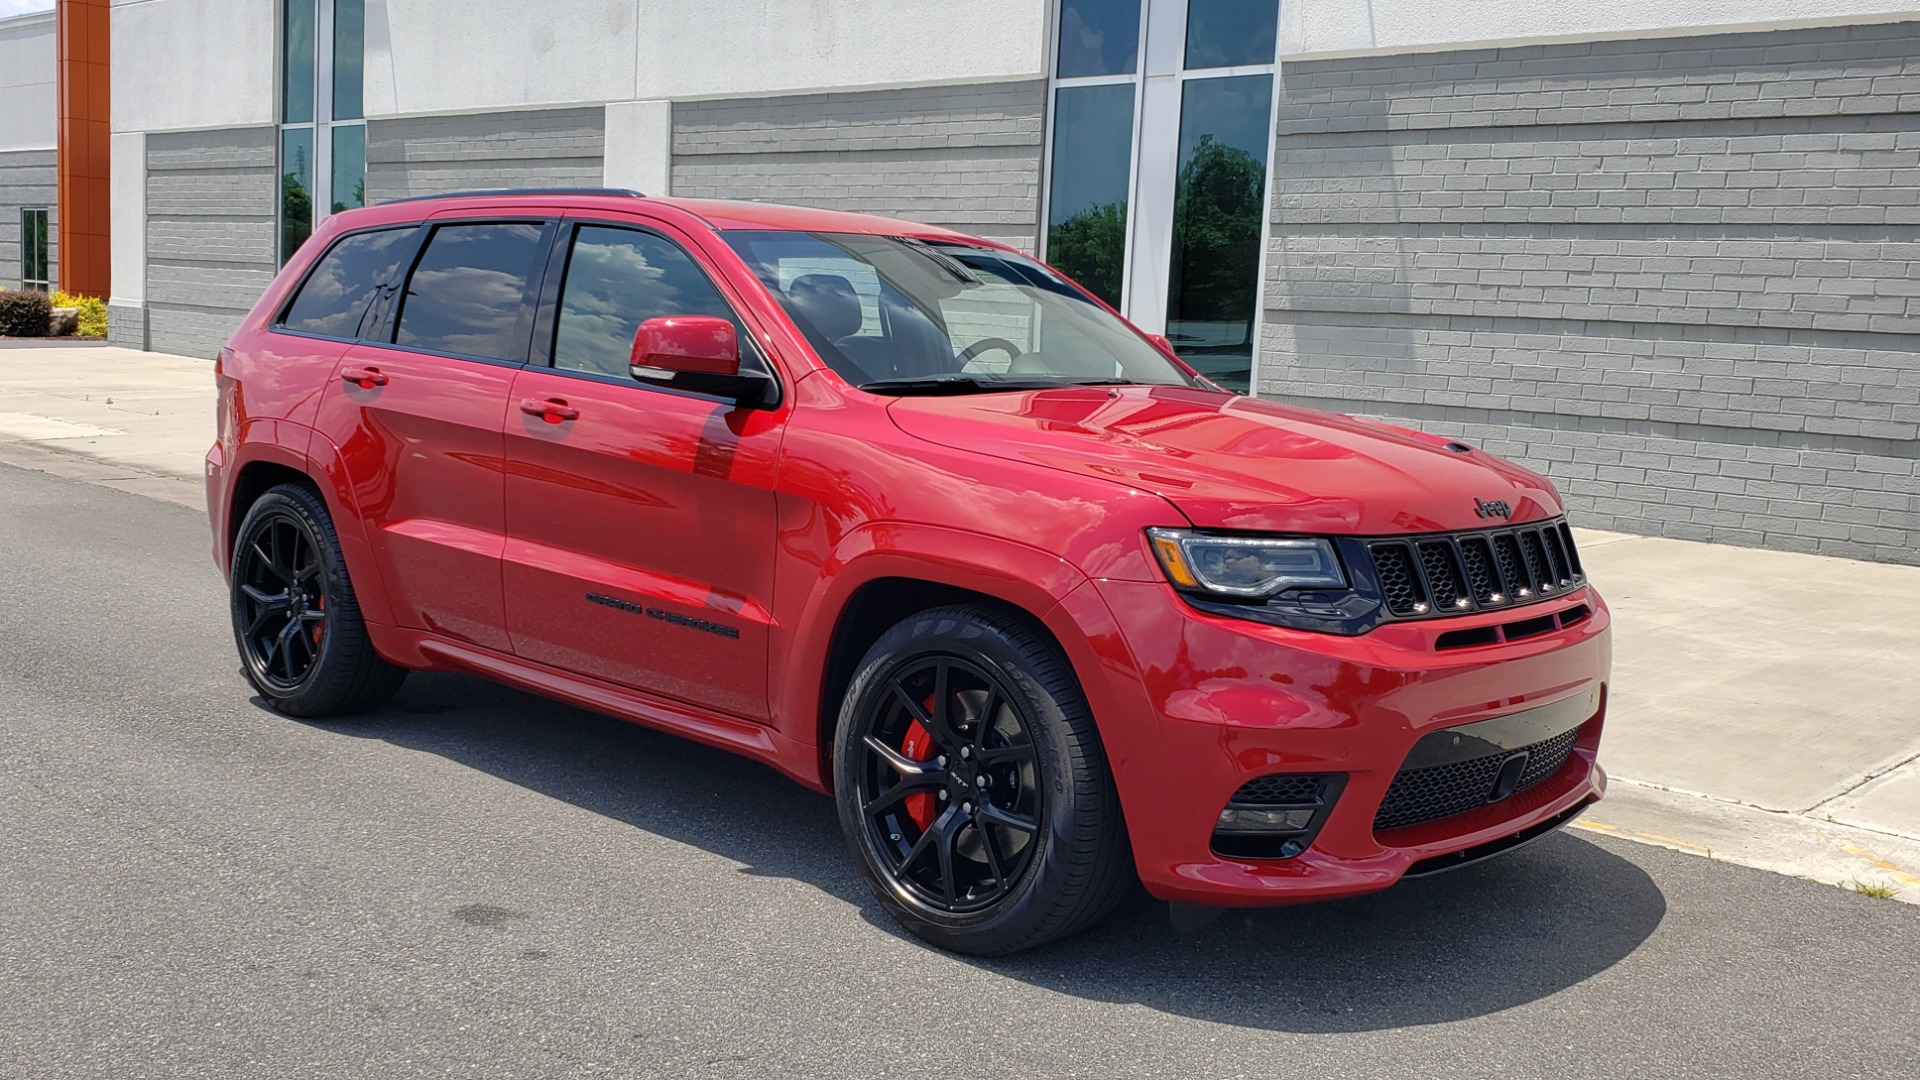 Used 2018 Jeep GRAND CHEROKEE SRT 4X4 / 6.4L HEMI (475HP) / NAV / SUNROOF / H/K SND / REARVIEW for sale Sold at Formula Imports in Charlotte NC 28227 14